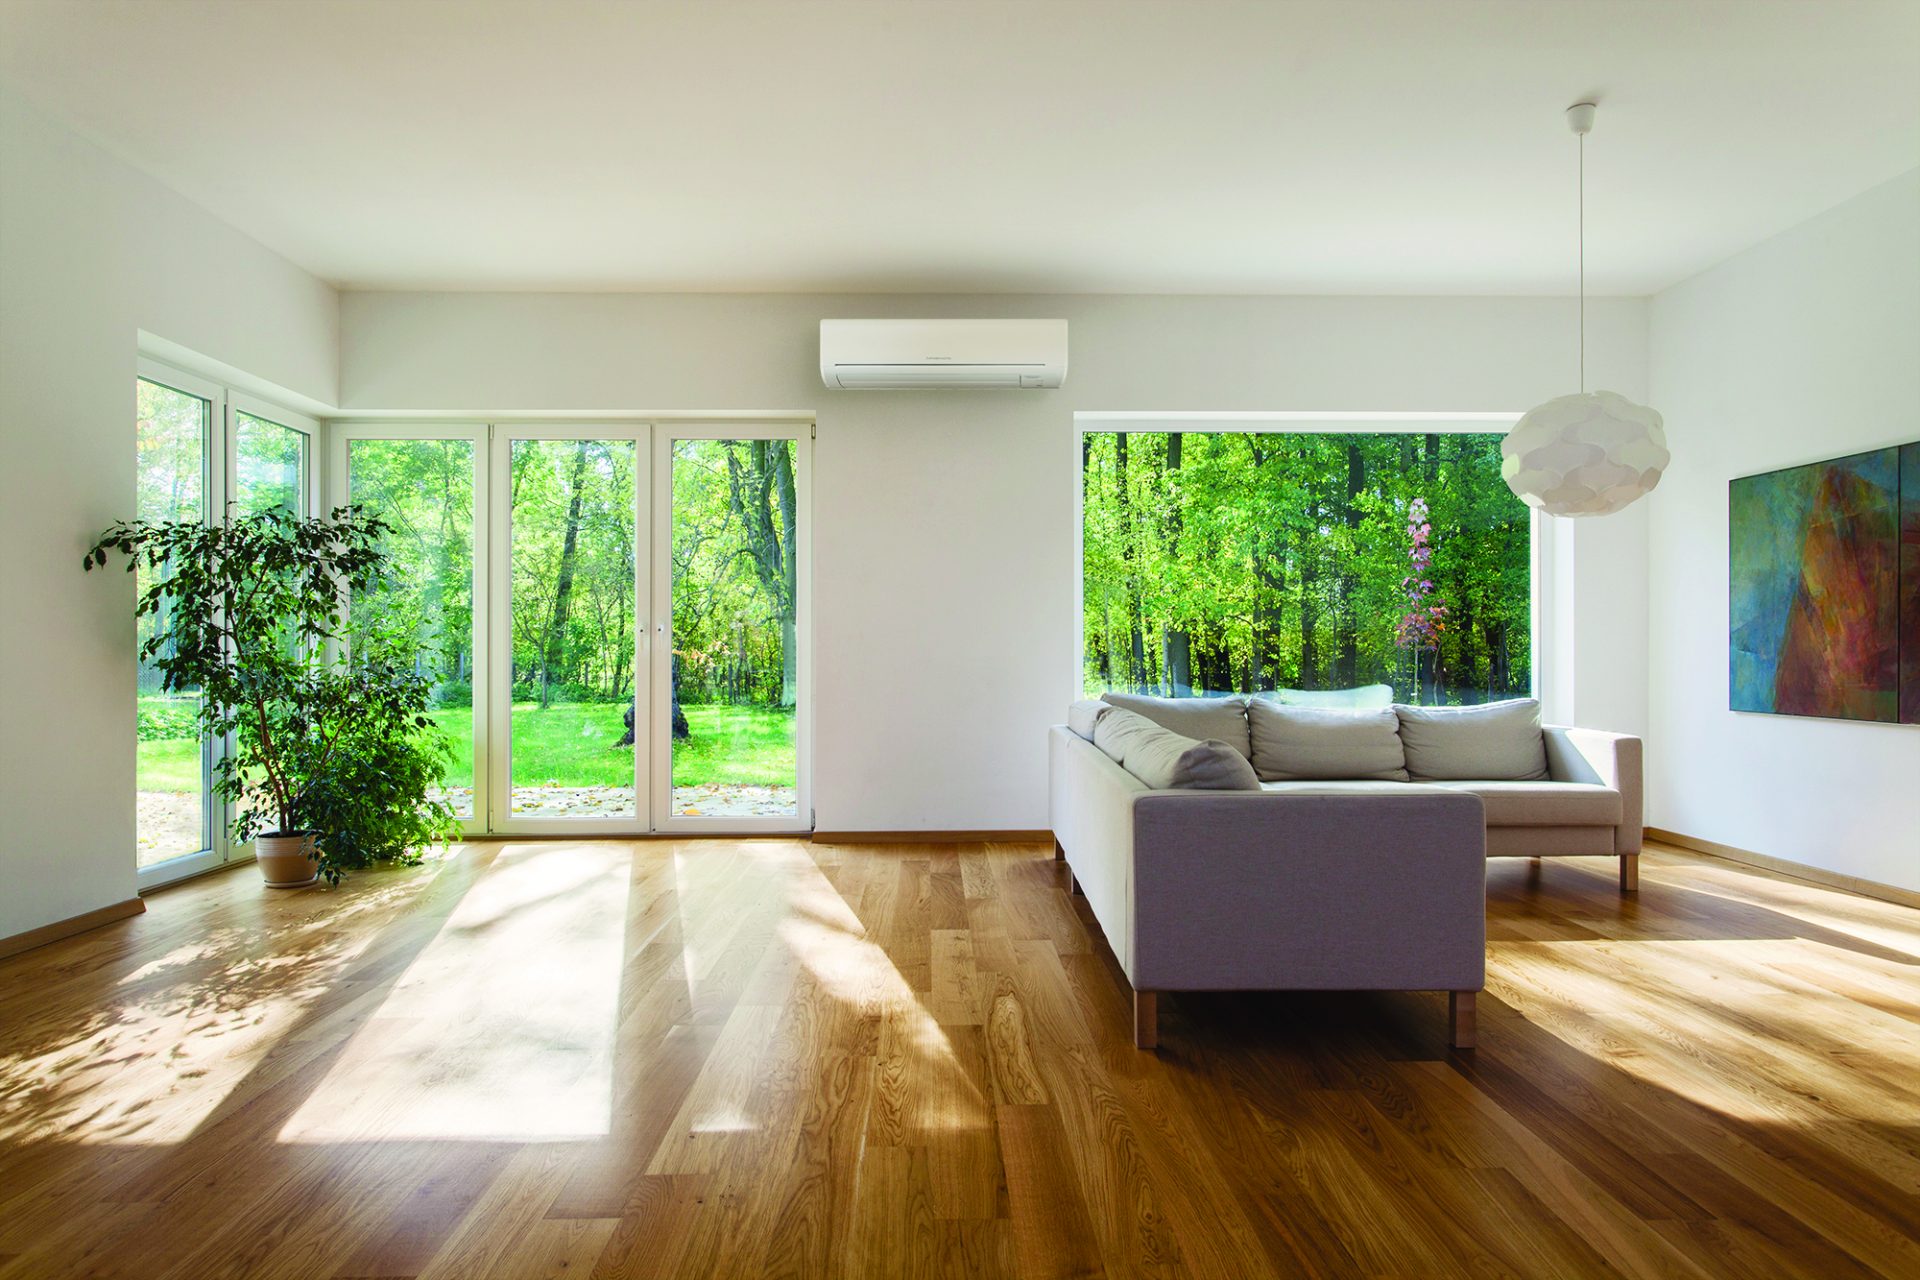 Lounge with a heat pump mounted on the wall. The room has wooden floors and large windows